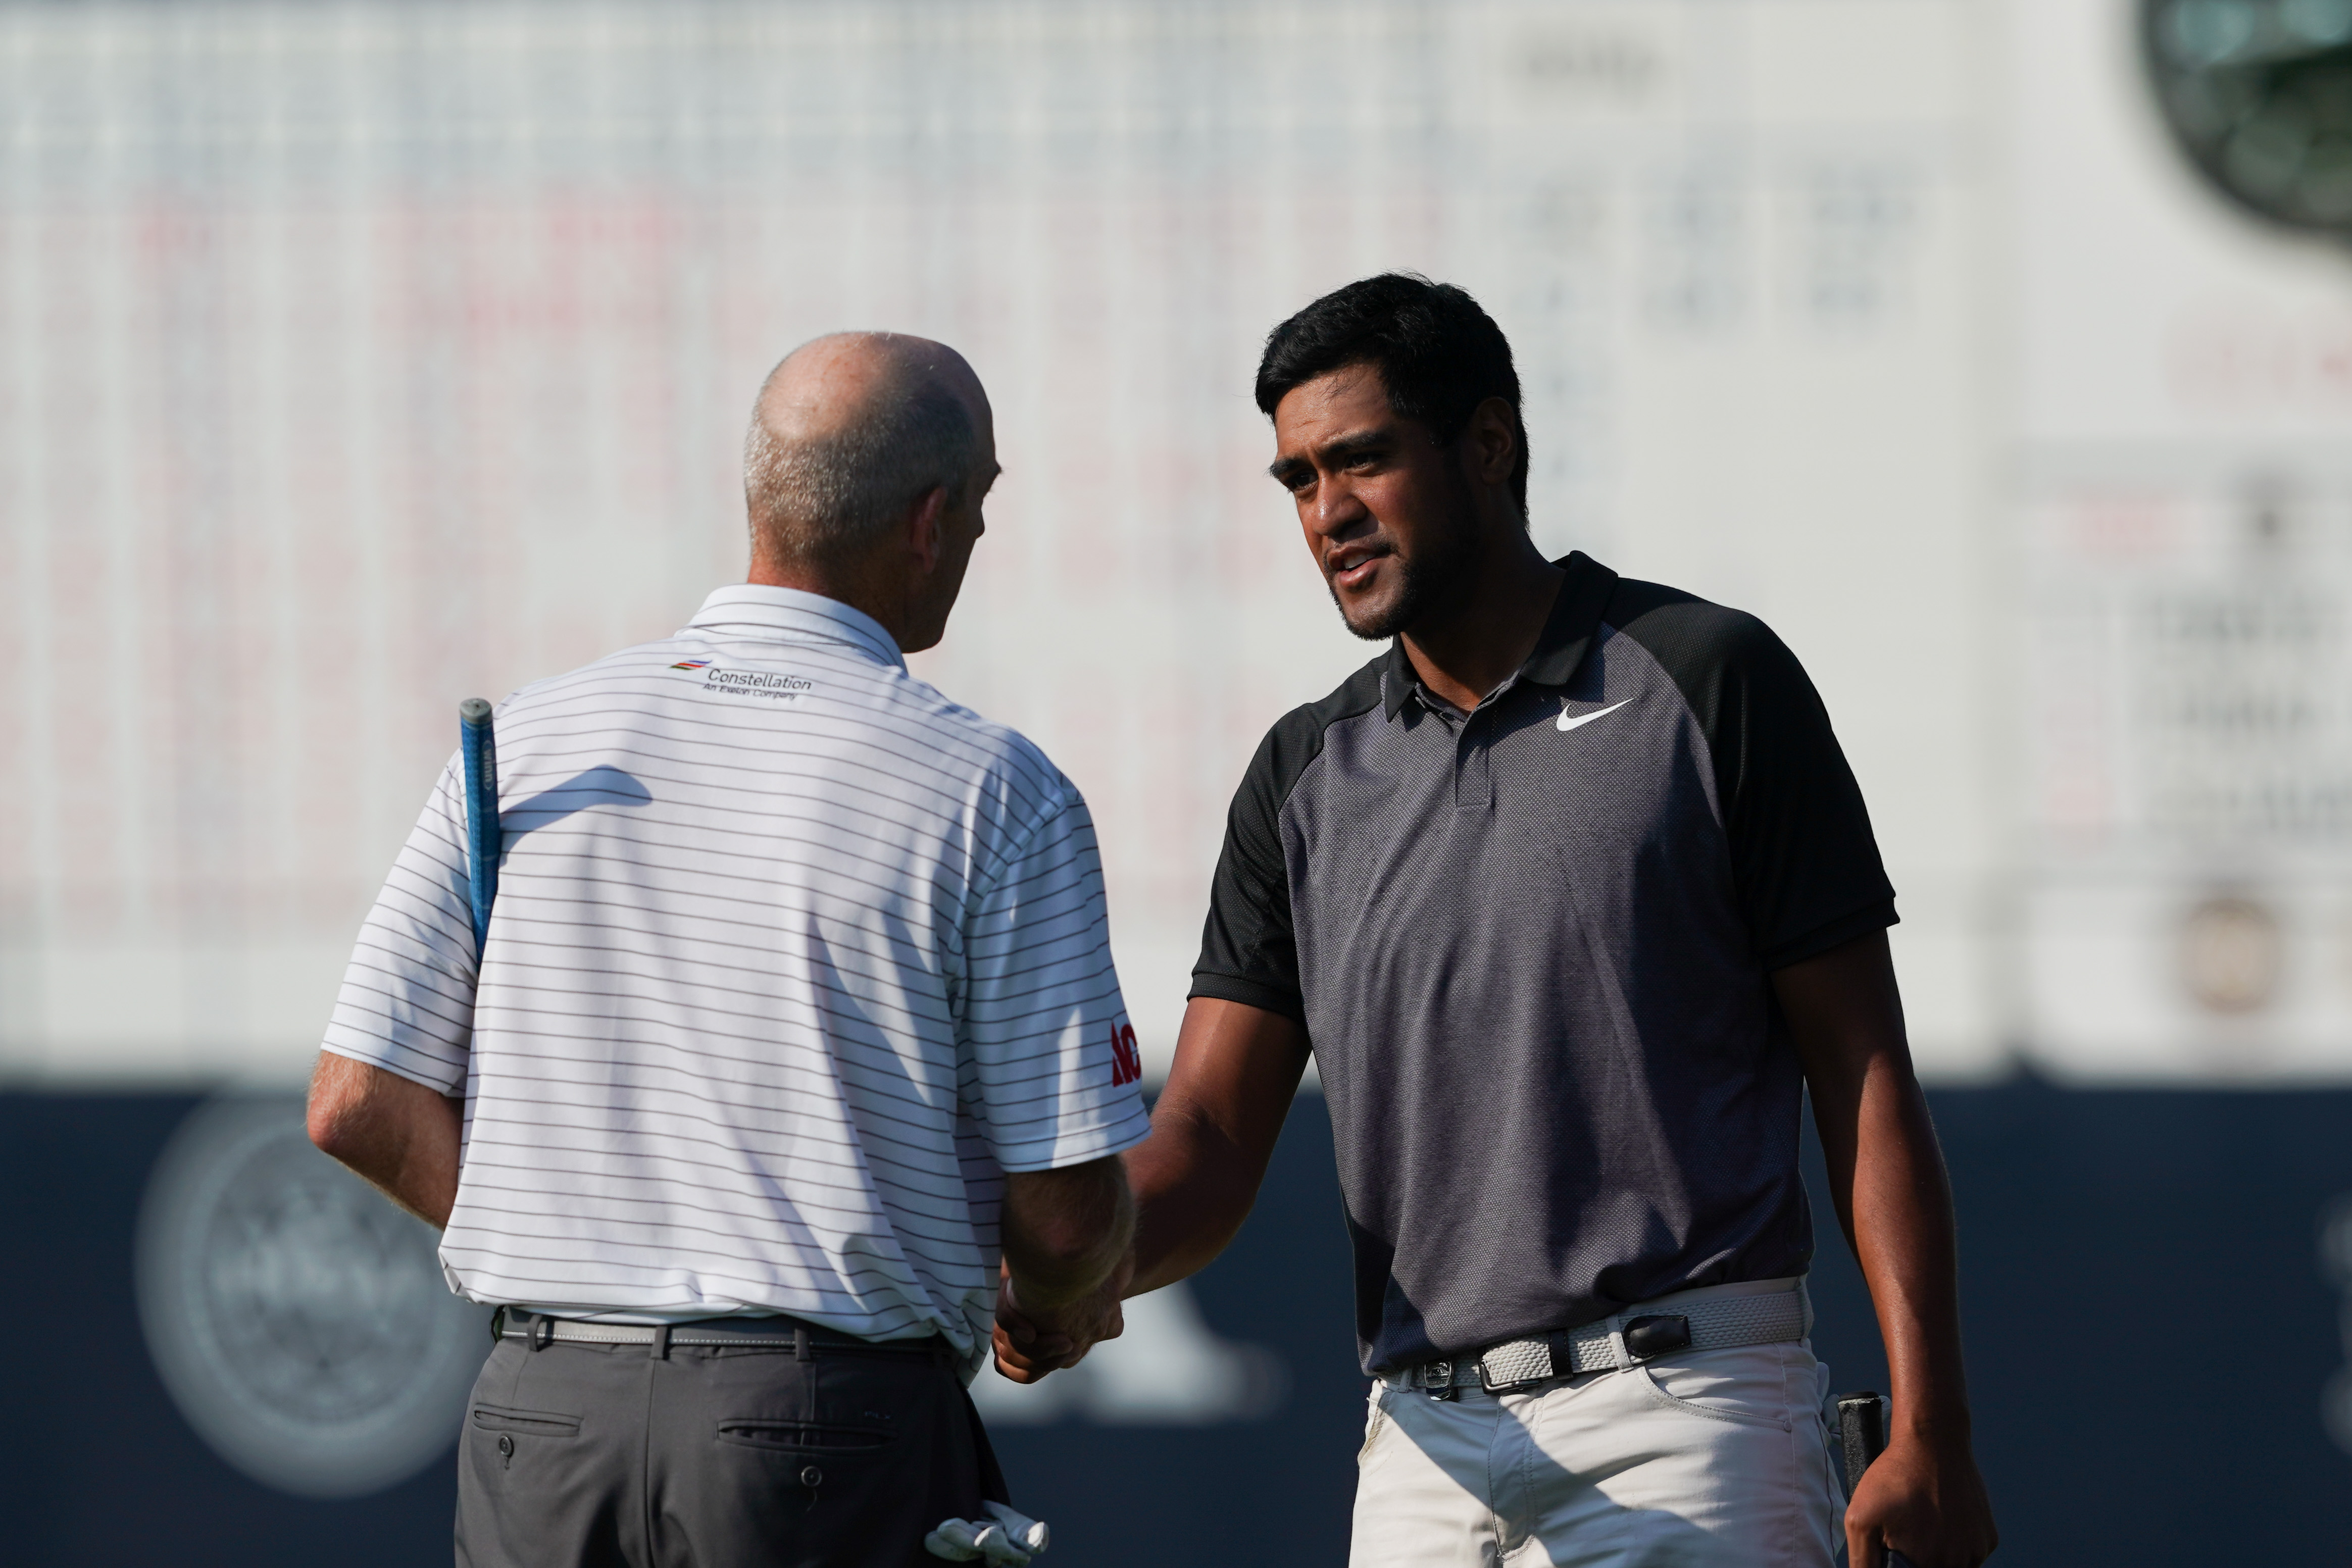 Ryder Cup hopeful Tony Finau gets another day with U.S. captain Jim Furyk in PGA Championship pairing